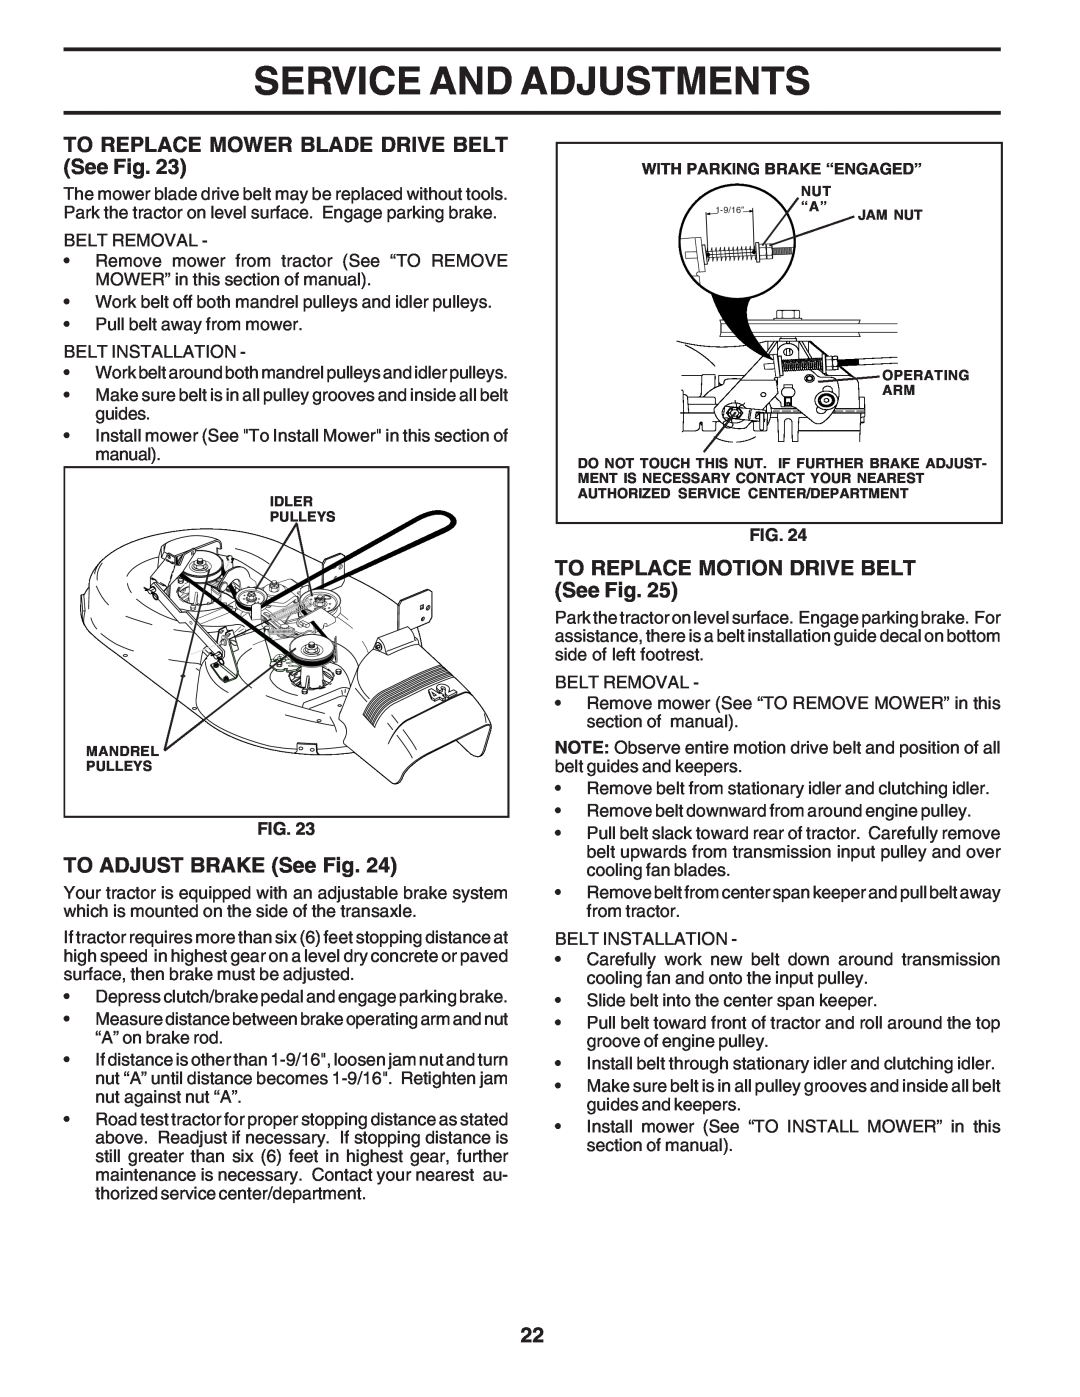 Poulan 183255 TO REPLACE MOWER BLADE DRIVE BELT See Fig, TO ADJUST BRAKE See Fig, TO REPLACE MOTION DRIVE BELT See Fig 